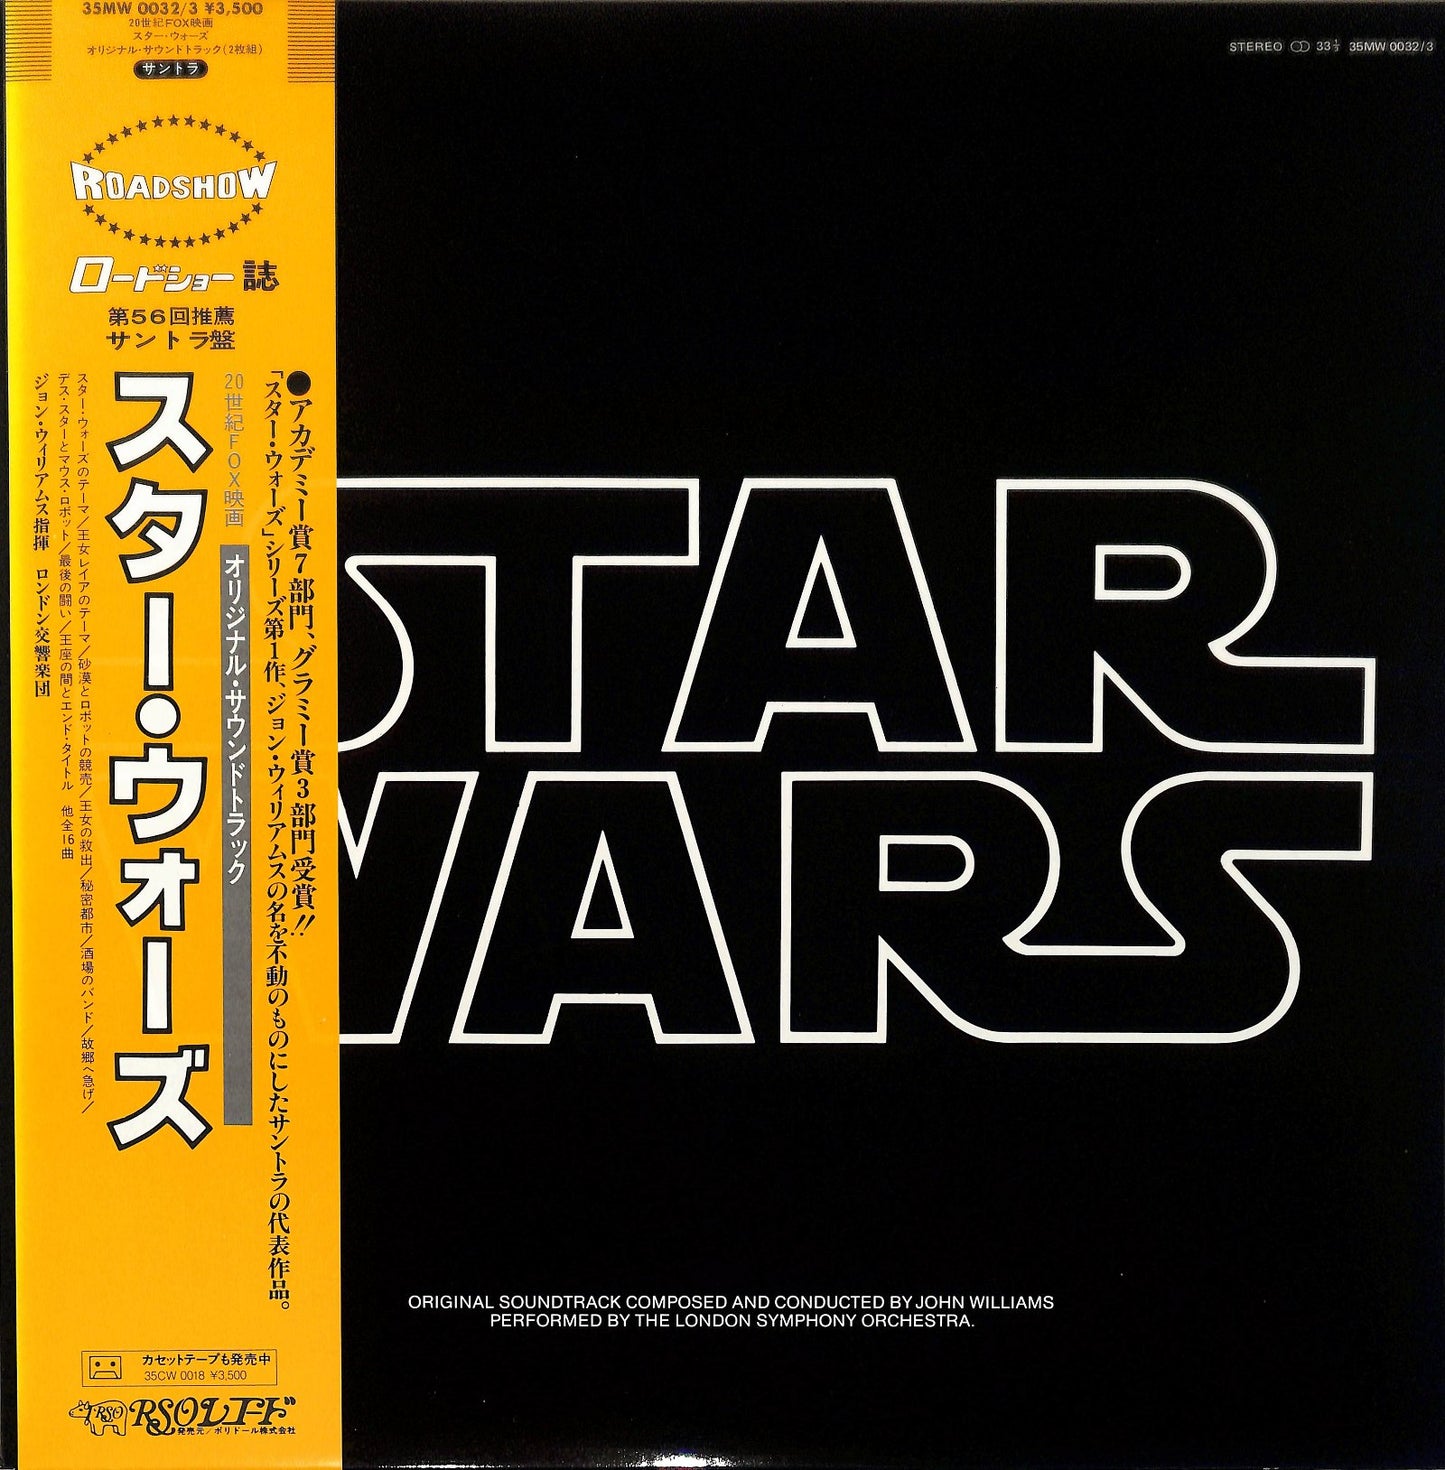 JOHN WILLIAMS AND THE LONDON SYMPHONY ORCHESTRA - Star Wars